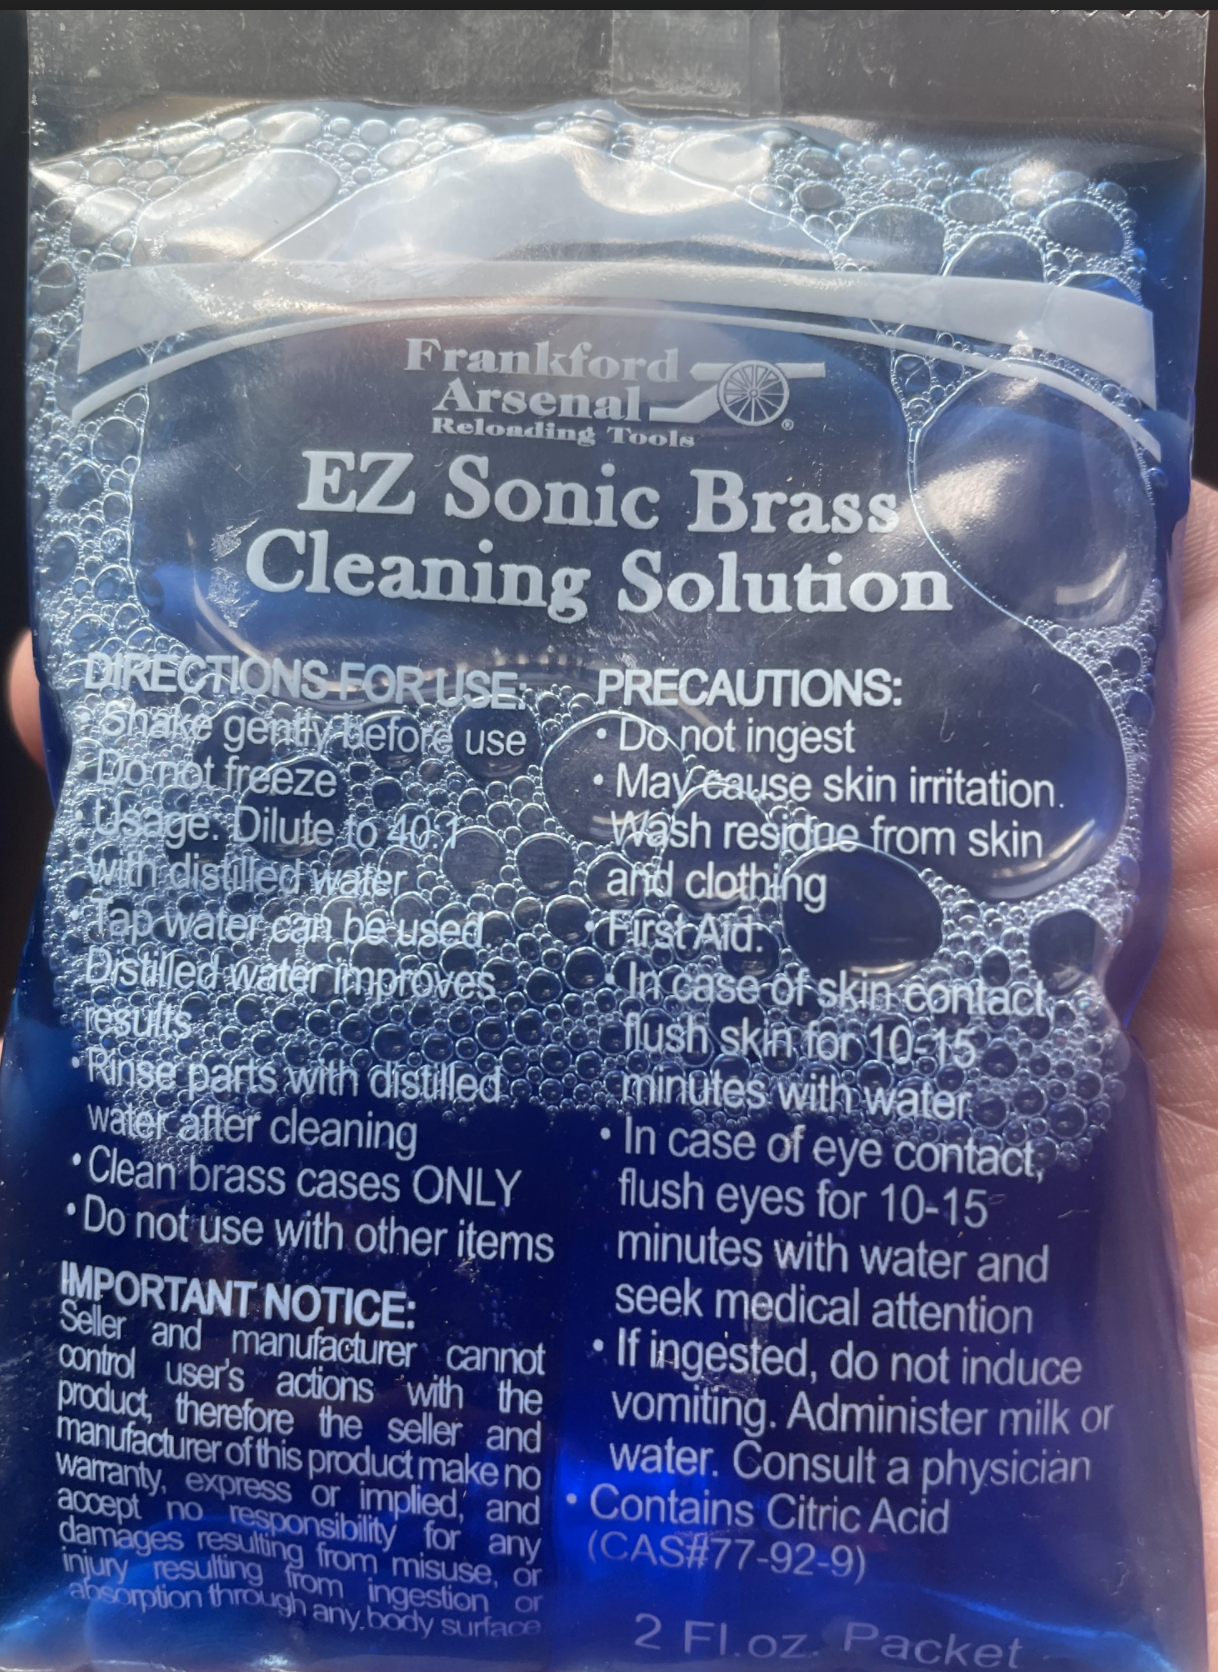 EZ Sonic Brass Cleaning Solution